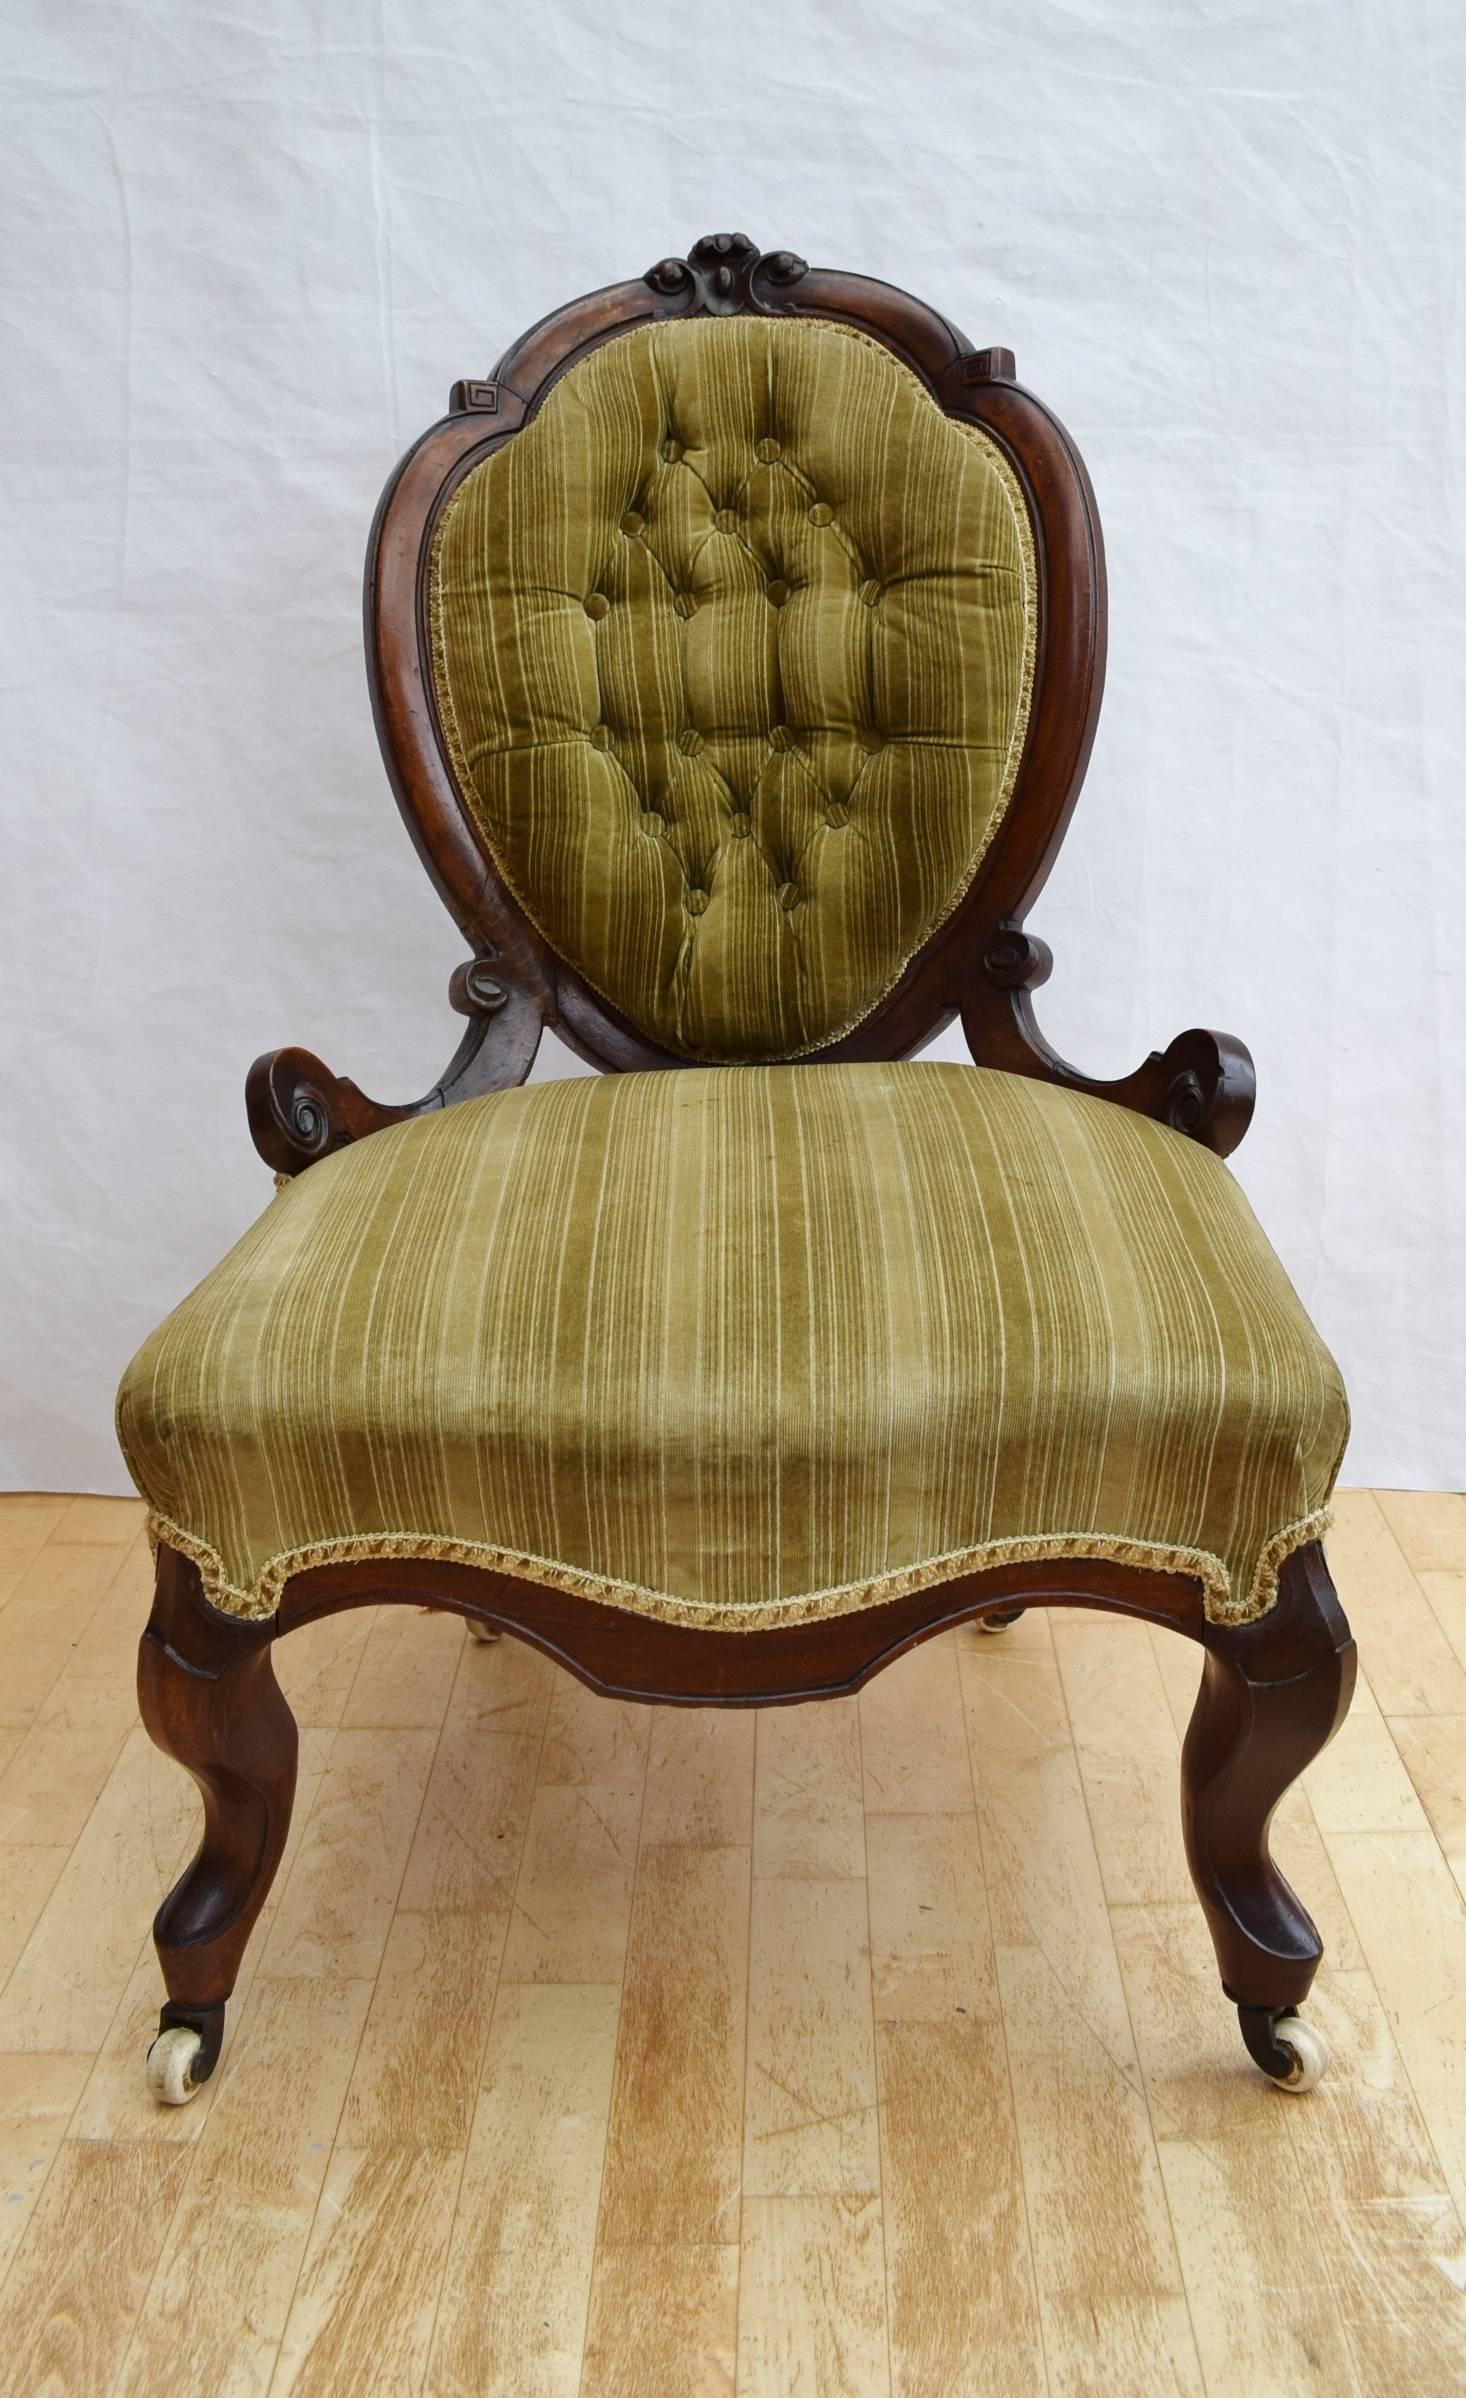 Victorian Antique Mahogany Nursing, Lounge or Bedroom Chair Excellent Condition In Excellent Condition For Sale In Selston, Nottinghamshire